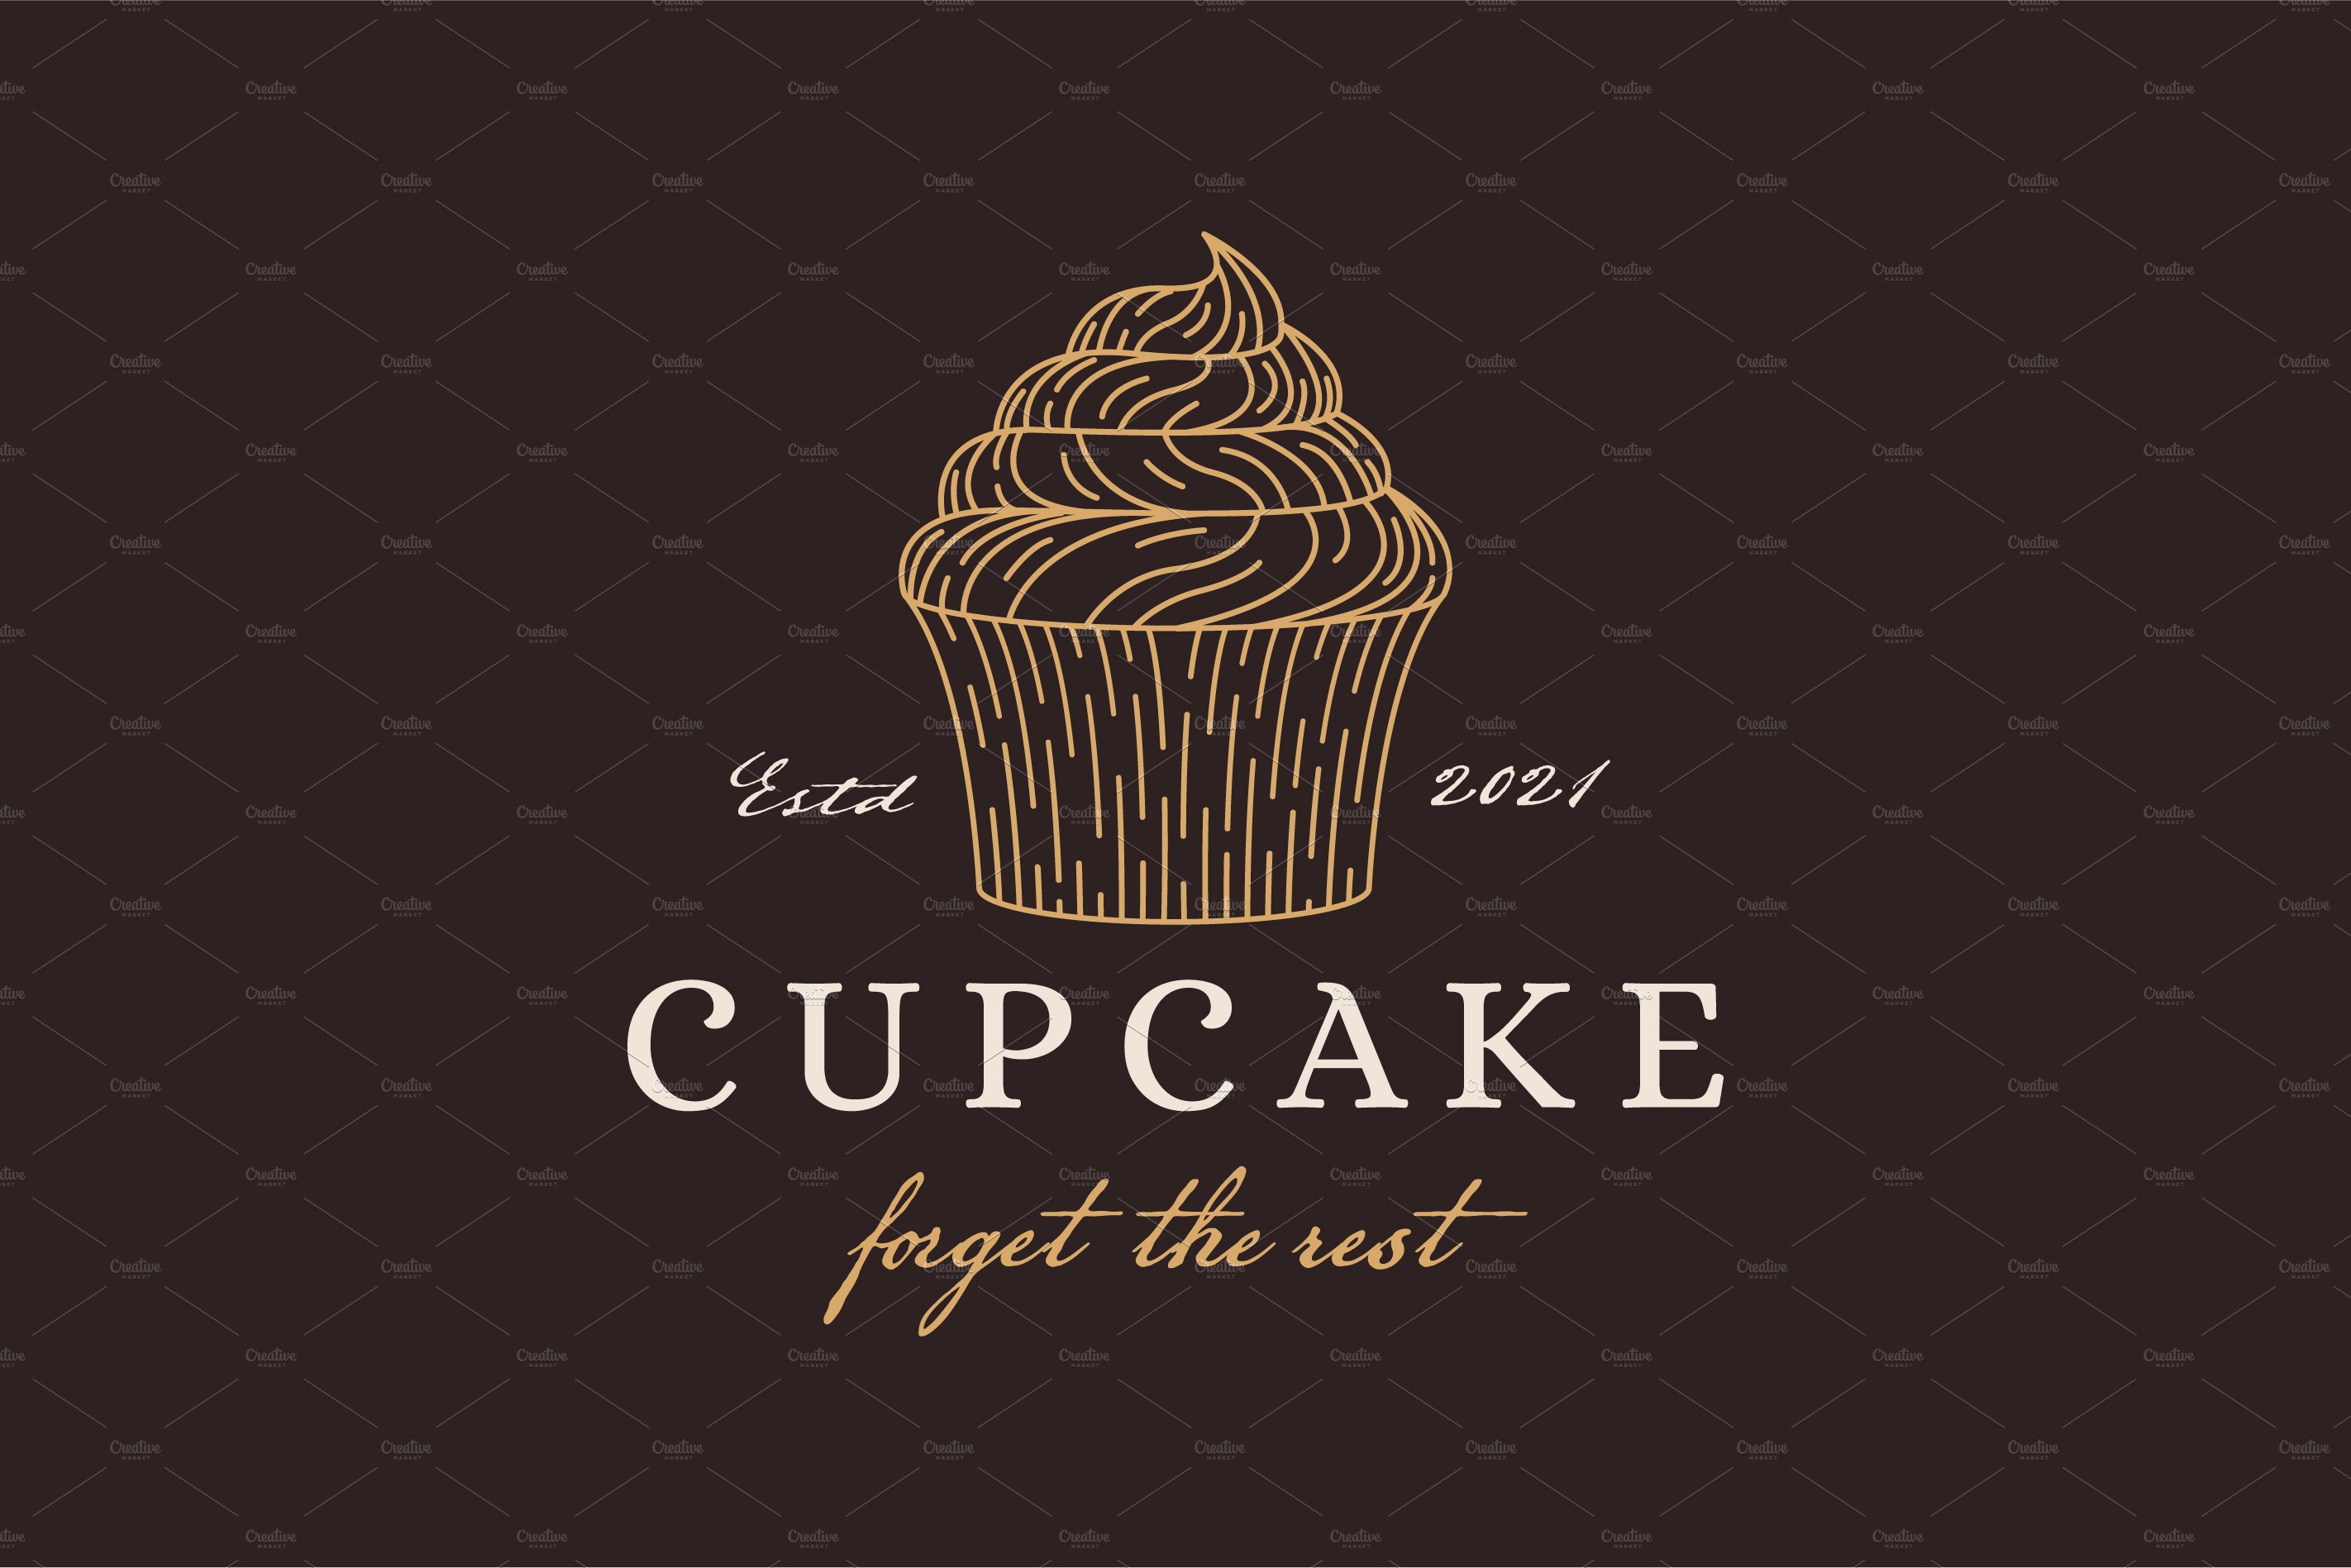 Free Vectors | 7 CUP CAKES